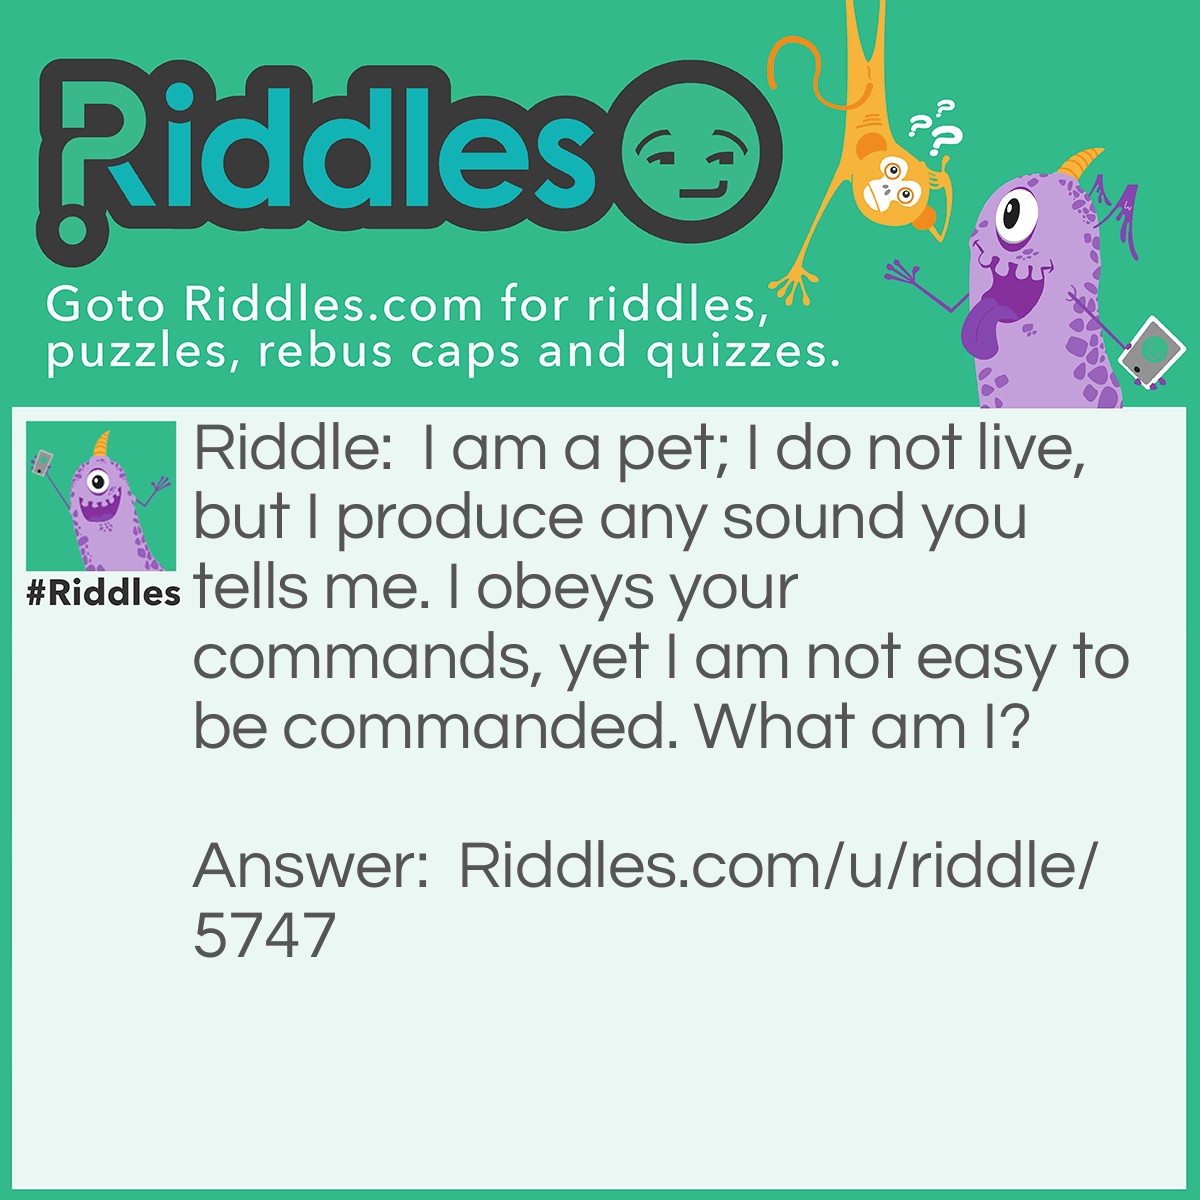 Riddle: I am a pet; I do not live, but I produce any sound you tells me. I obeys your commands, yet I am not easy to be commanded. What am I? Answer: A TRUMpet.